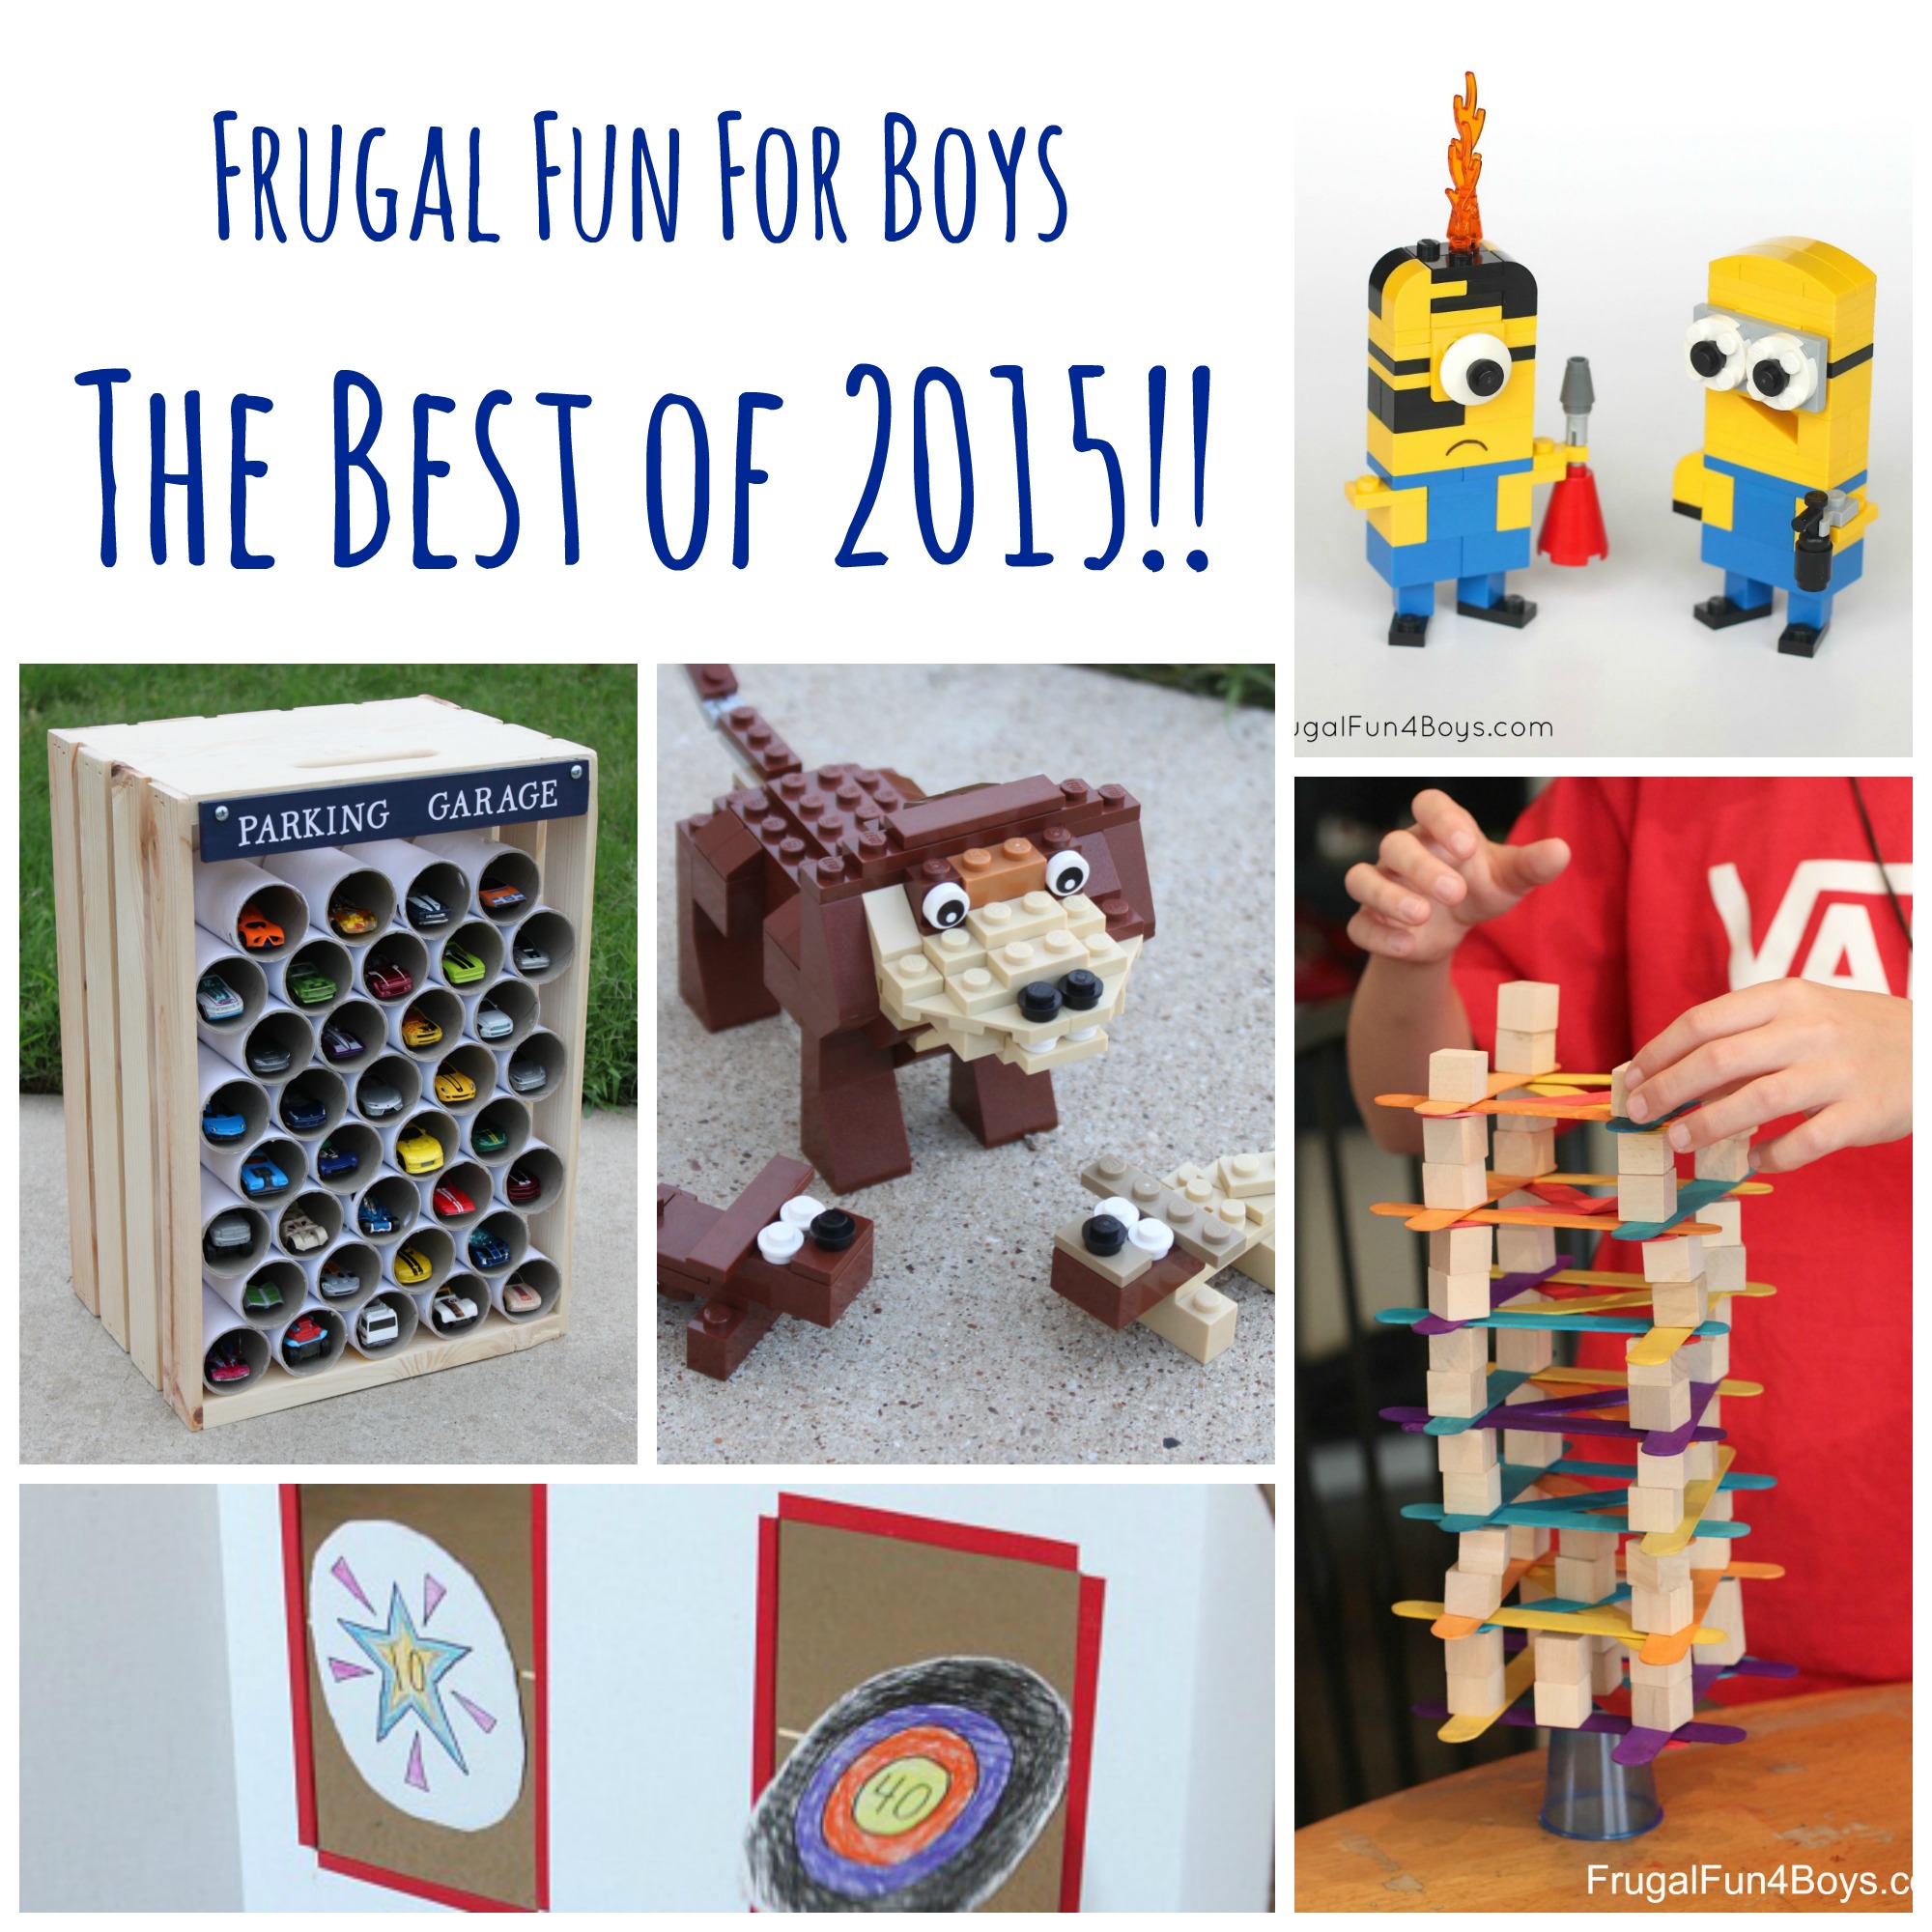 The Top 15 Posts from Frugal Fun for Boys in 2015!